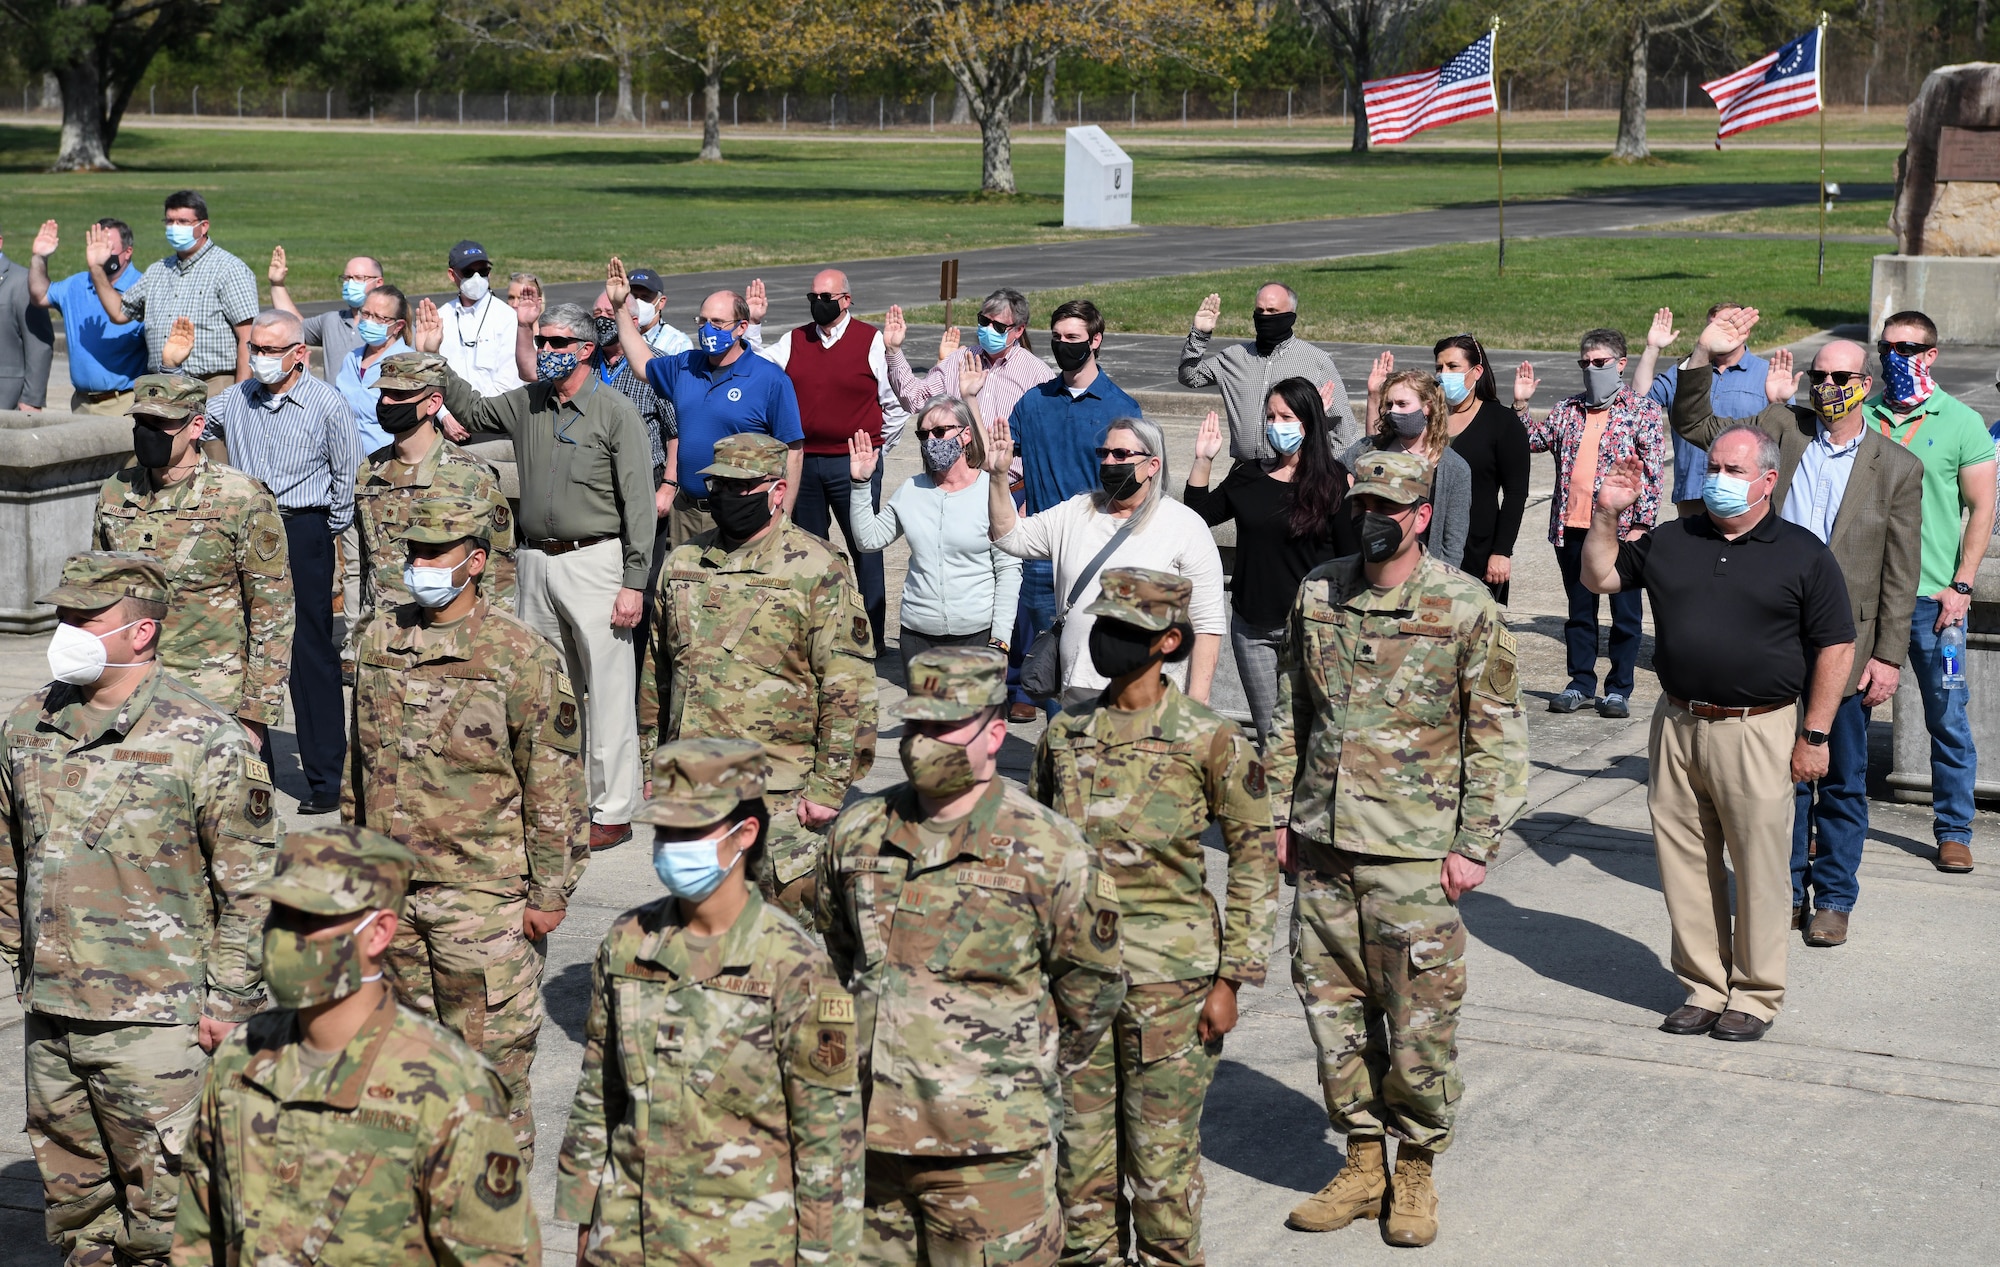 Department of Defense civilian employees reaffirm their oath of office during a flag retreat ceremony to mark the completion of the Extremism Stand Down exercises, April 6, 2021, at Arnold Air Force Base, Tenn. The importance of the oath of office was a focus of the stand down. (U.S. Air Force photo by Jill Pickett)